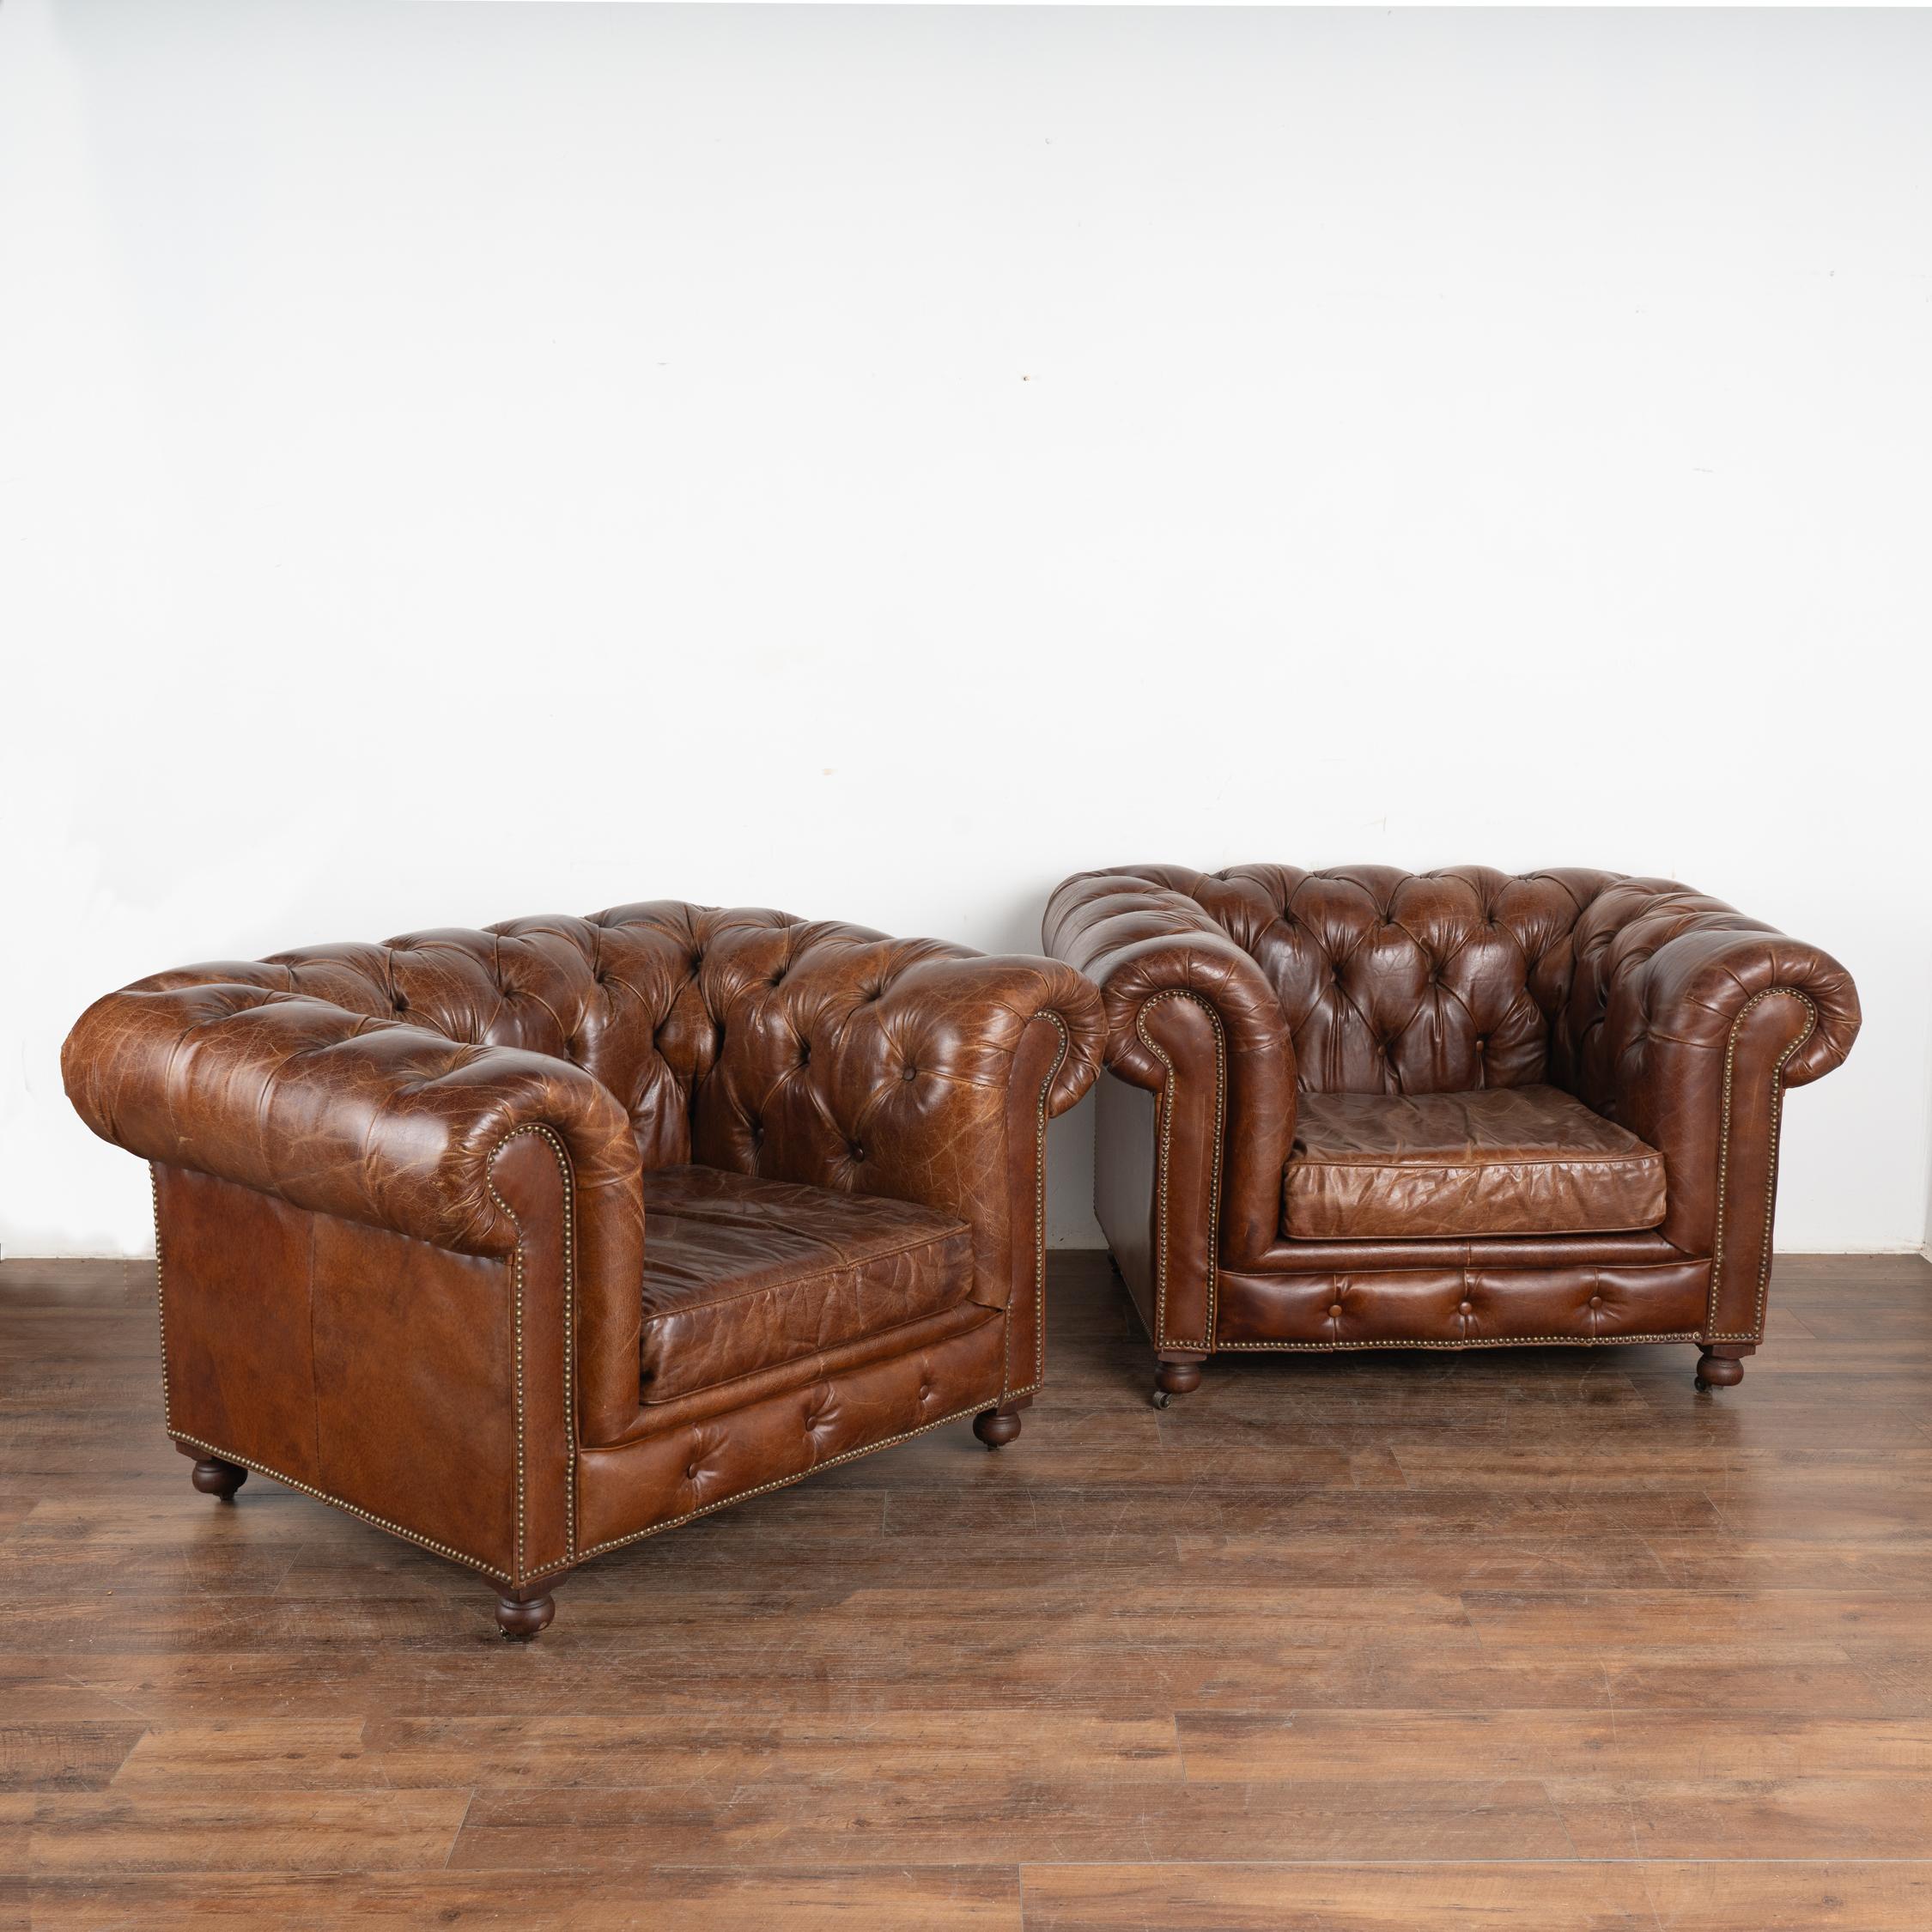 Pair, vintage brown leather chesterfield club arm chairs on castors.
Upholstered in tight button-tufted rich brown leather with nail head trim, rolled arms and loose seat cushions.
Sits comfortably and low with seat height at 16.5